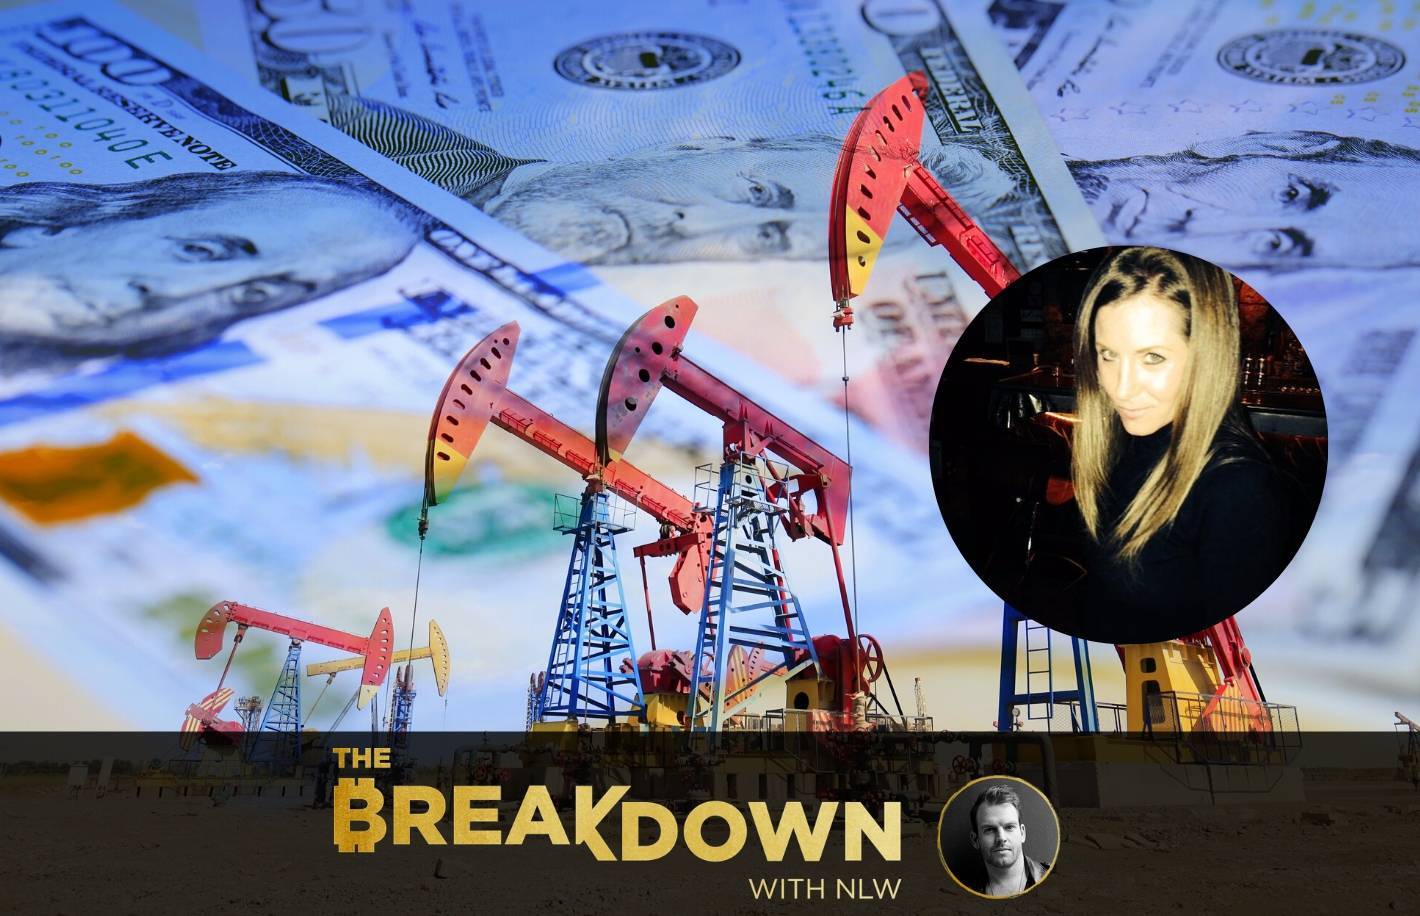 Oil 101: Simple Cash Enabled the Shale Revolution. w/ Tracy Shuchart